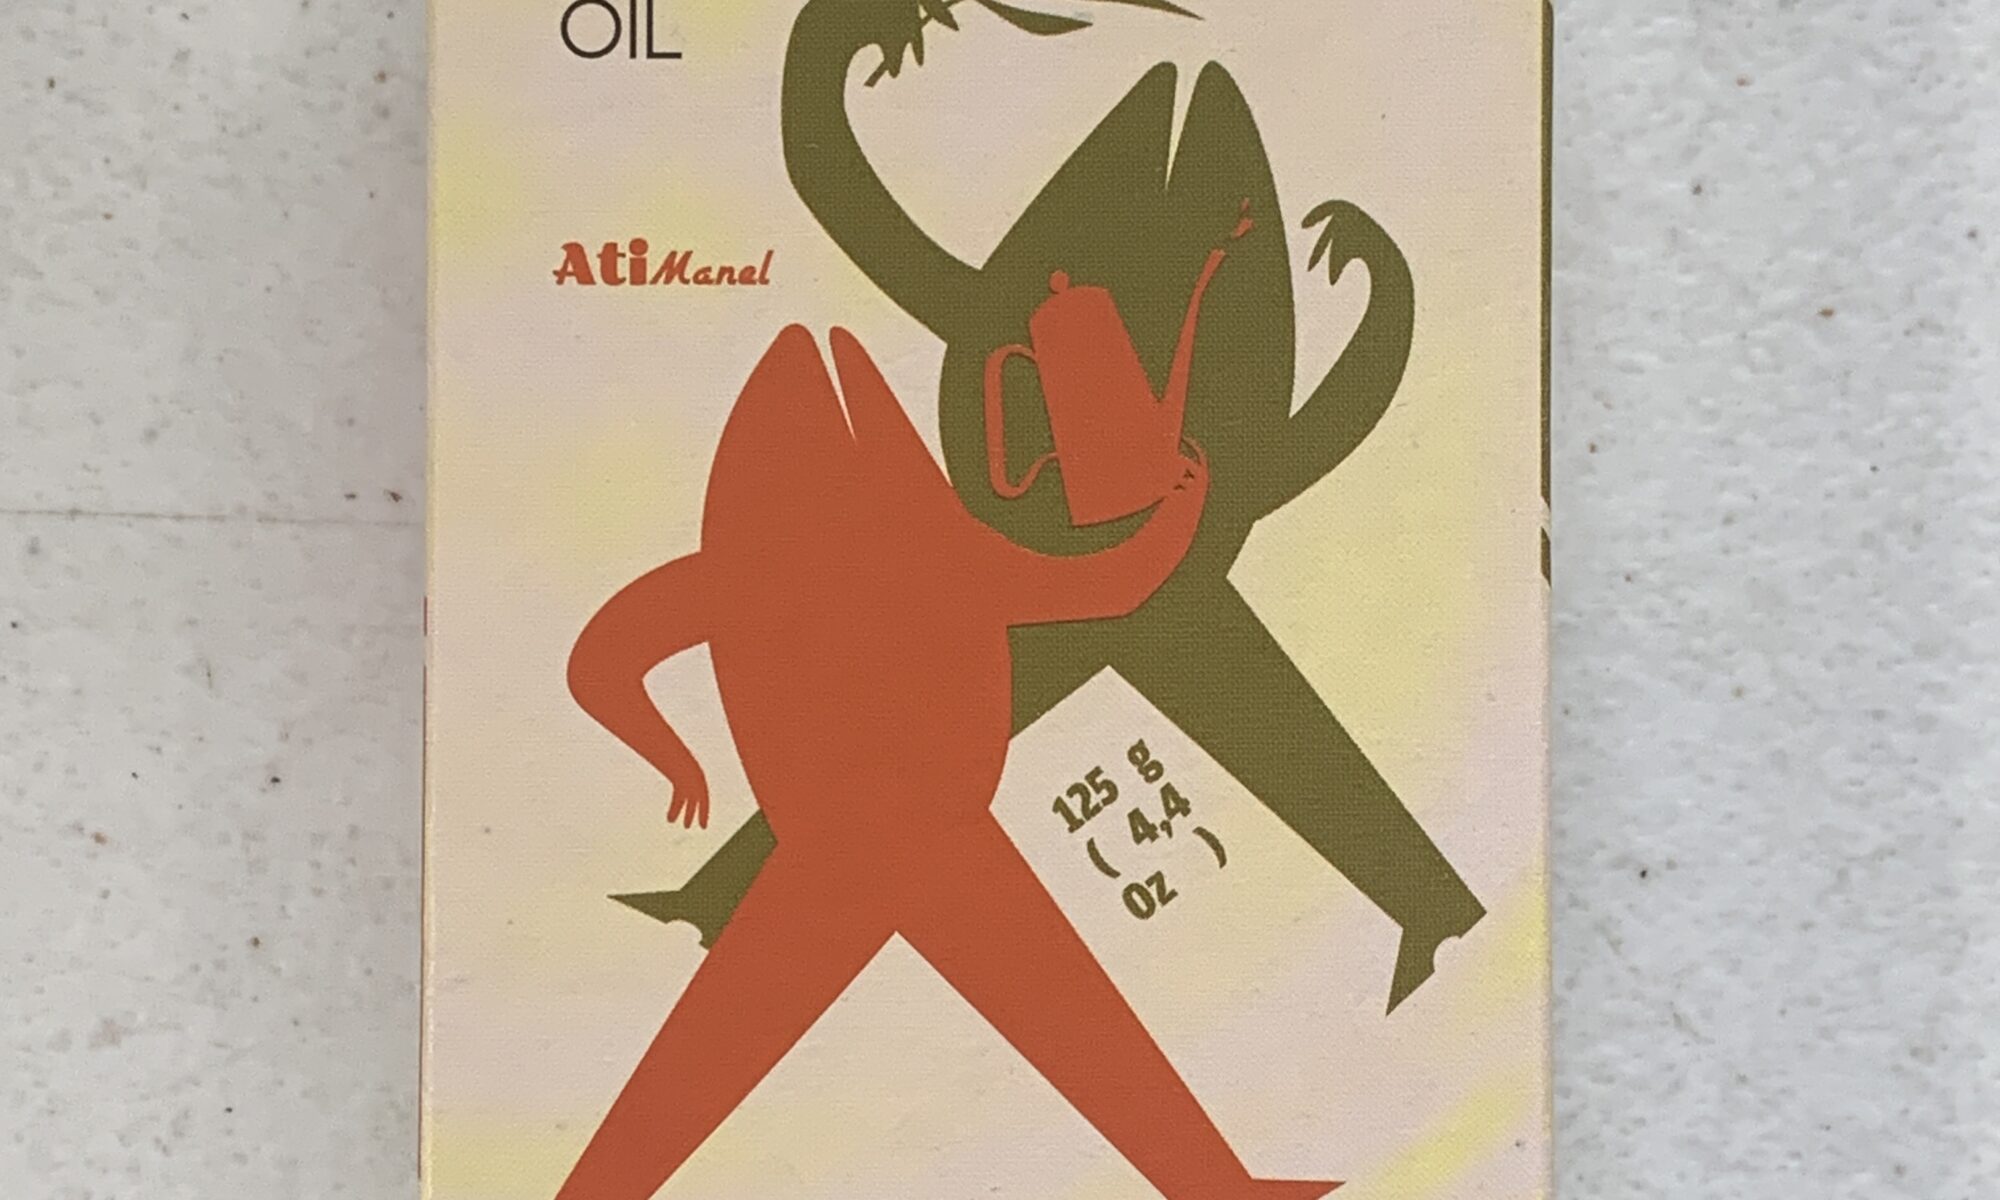 Image of the front of a package of Ati Manel Sardines in Olive Oil